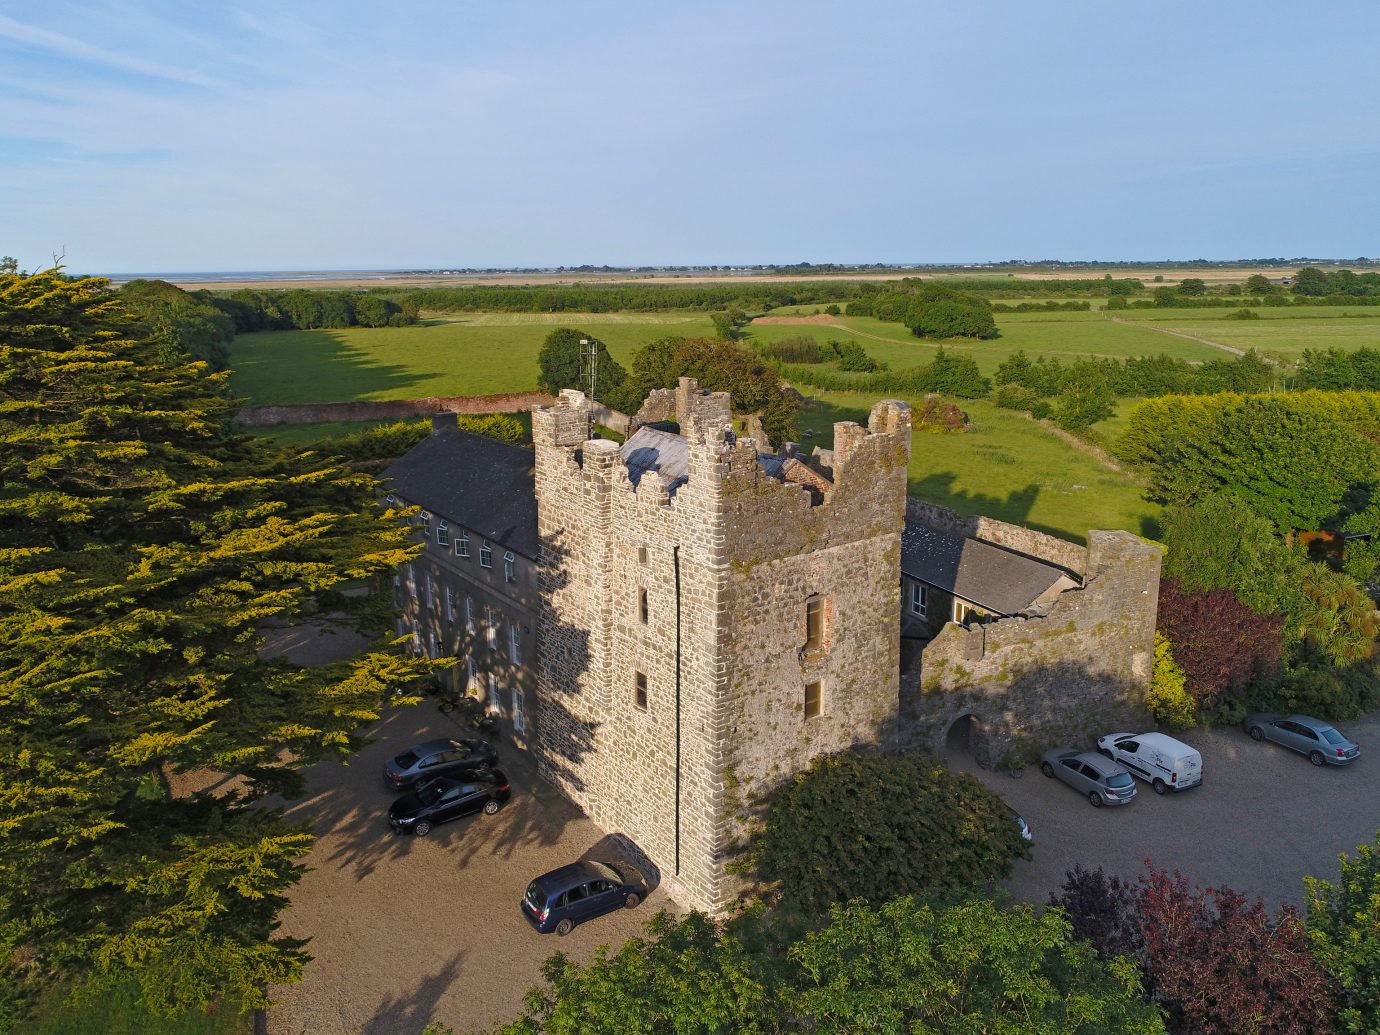 europe Hotels Ireland sky tree aerial photography castle estate Village château plant rural area stately home national trust for places of historic interest or natural beauty building fortification landscape bird's eye view field grass historic site